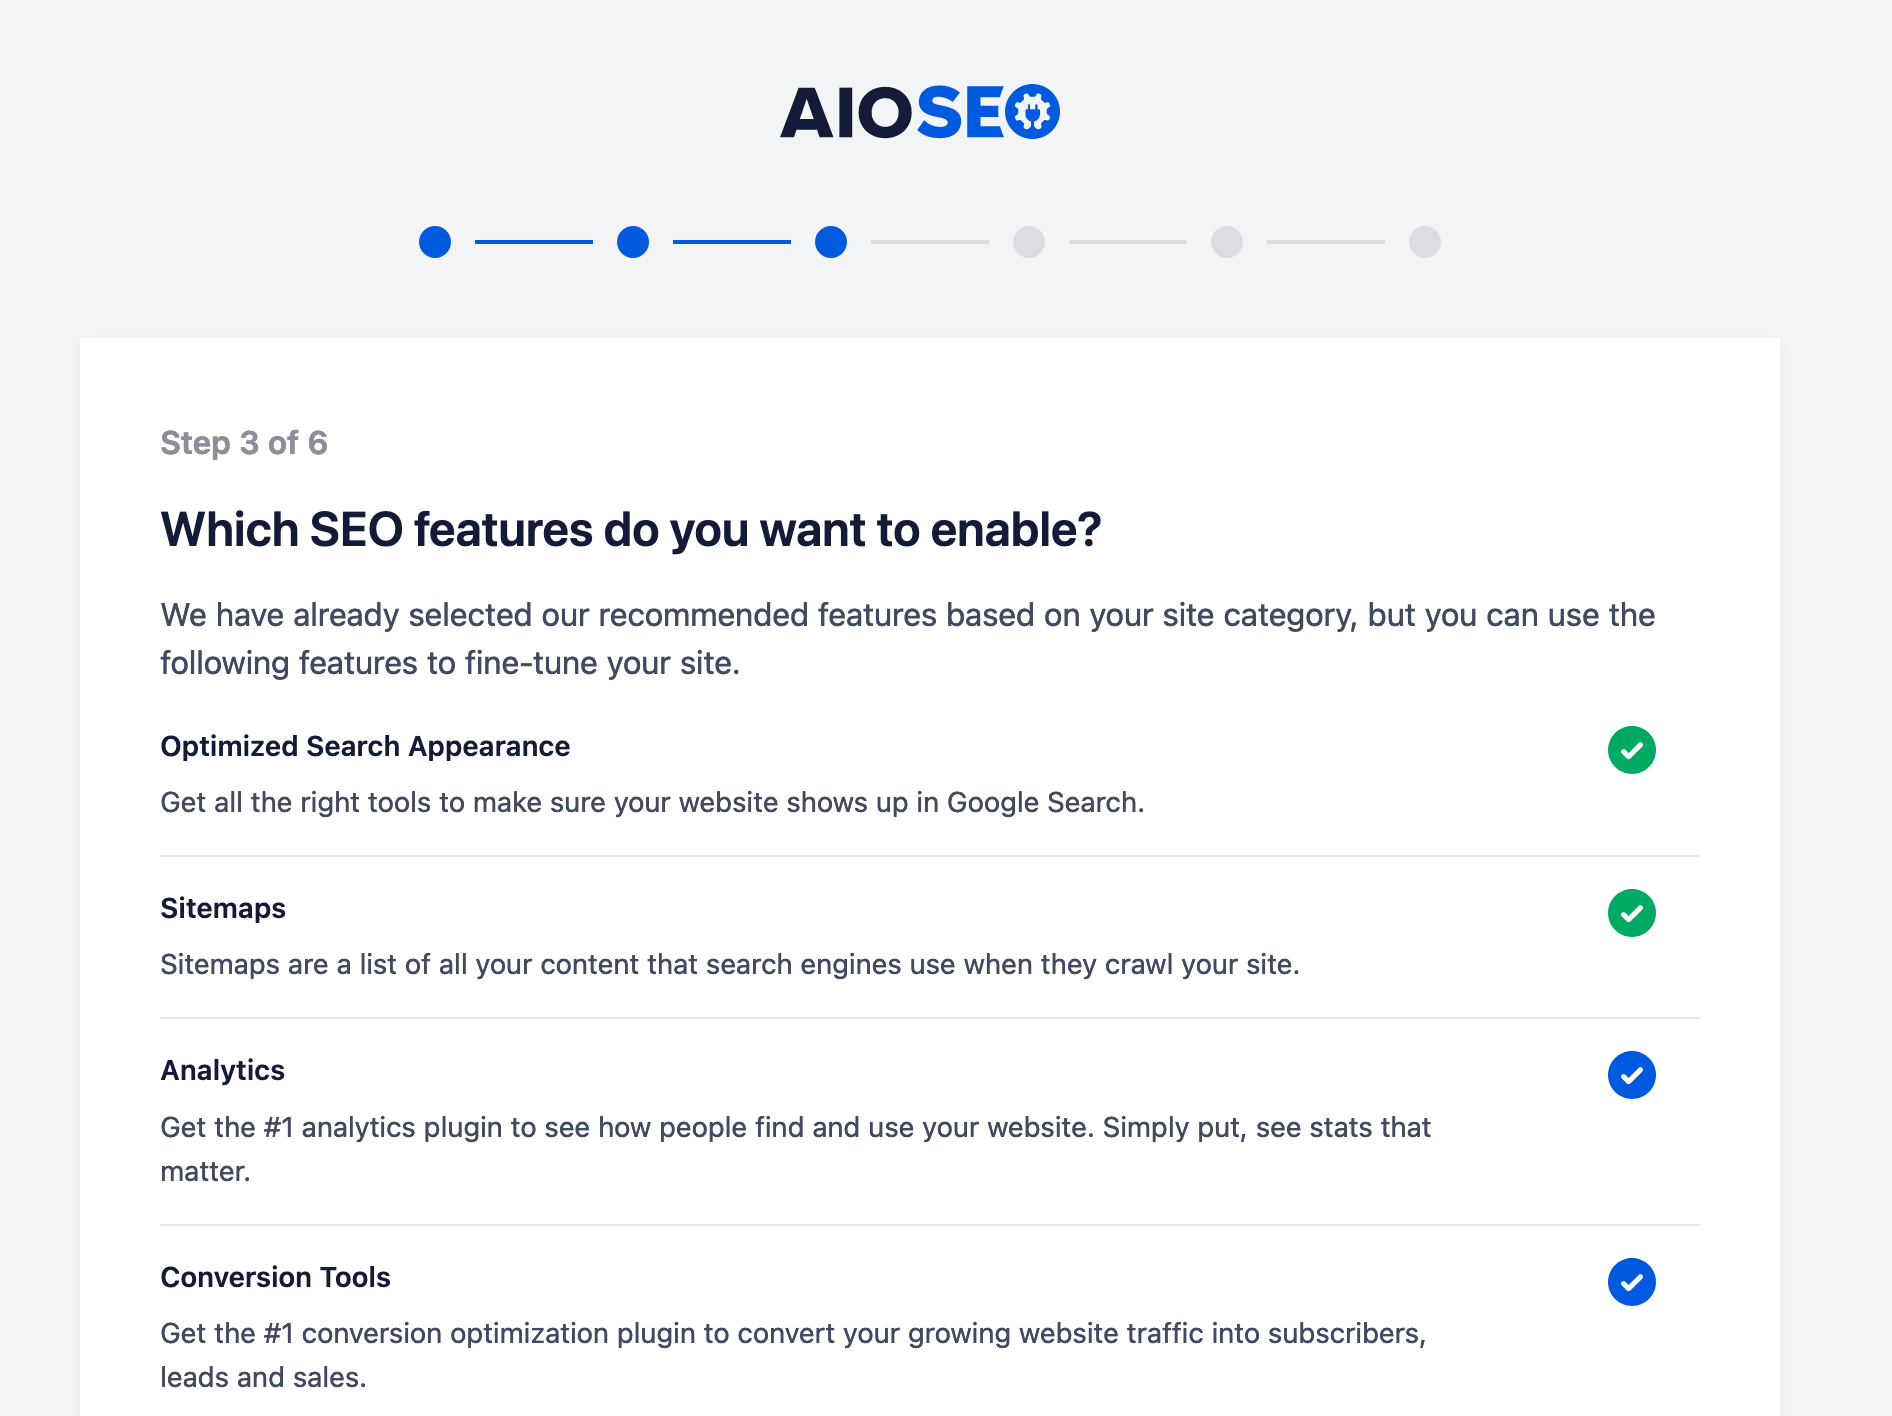 All in One SEO offers an installation wizard to guide you through the installation process.